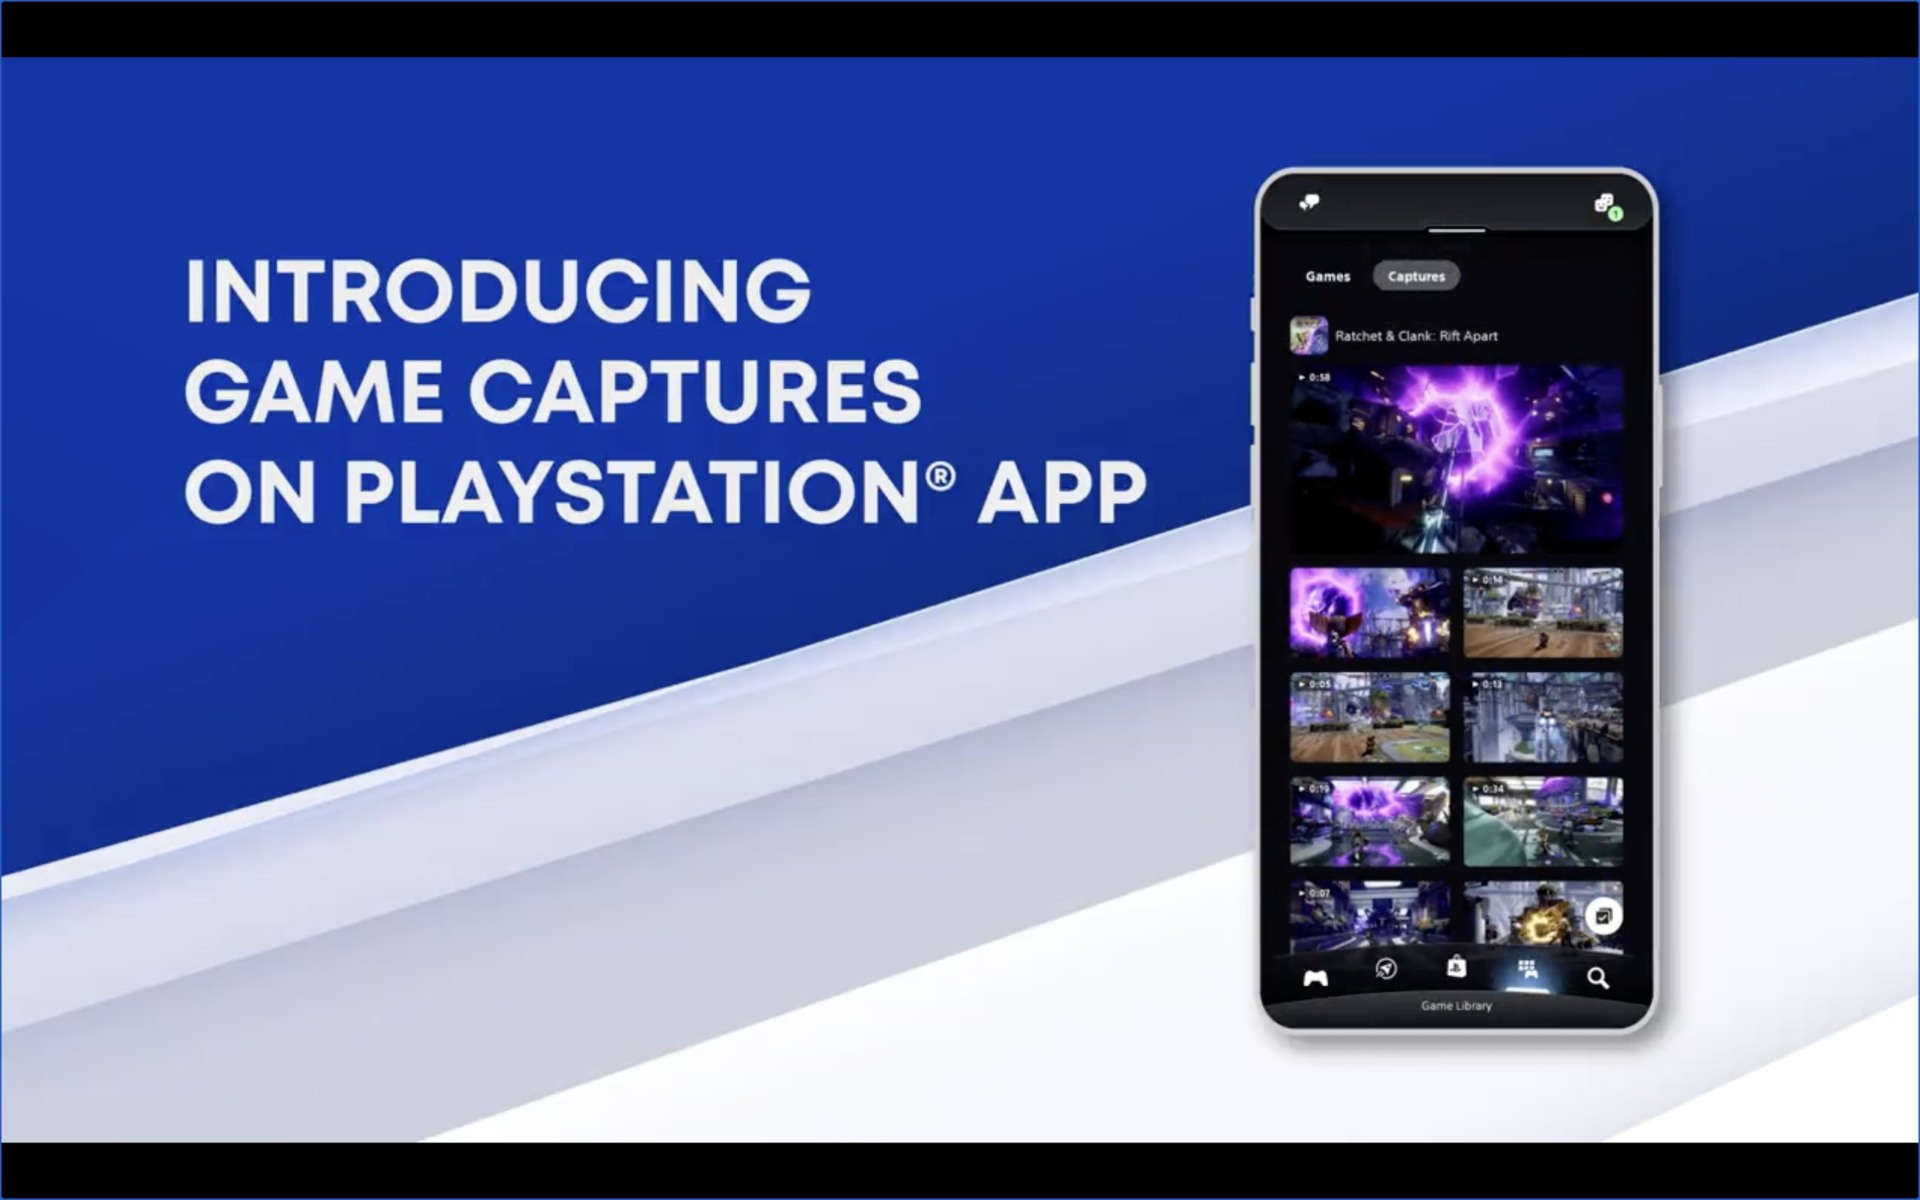 PS5 Screenshot and Video Captures Coming to the App in the Americas